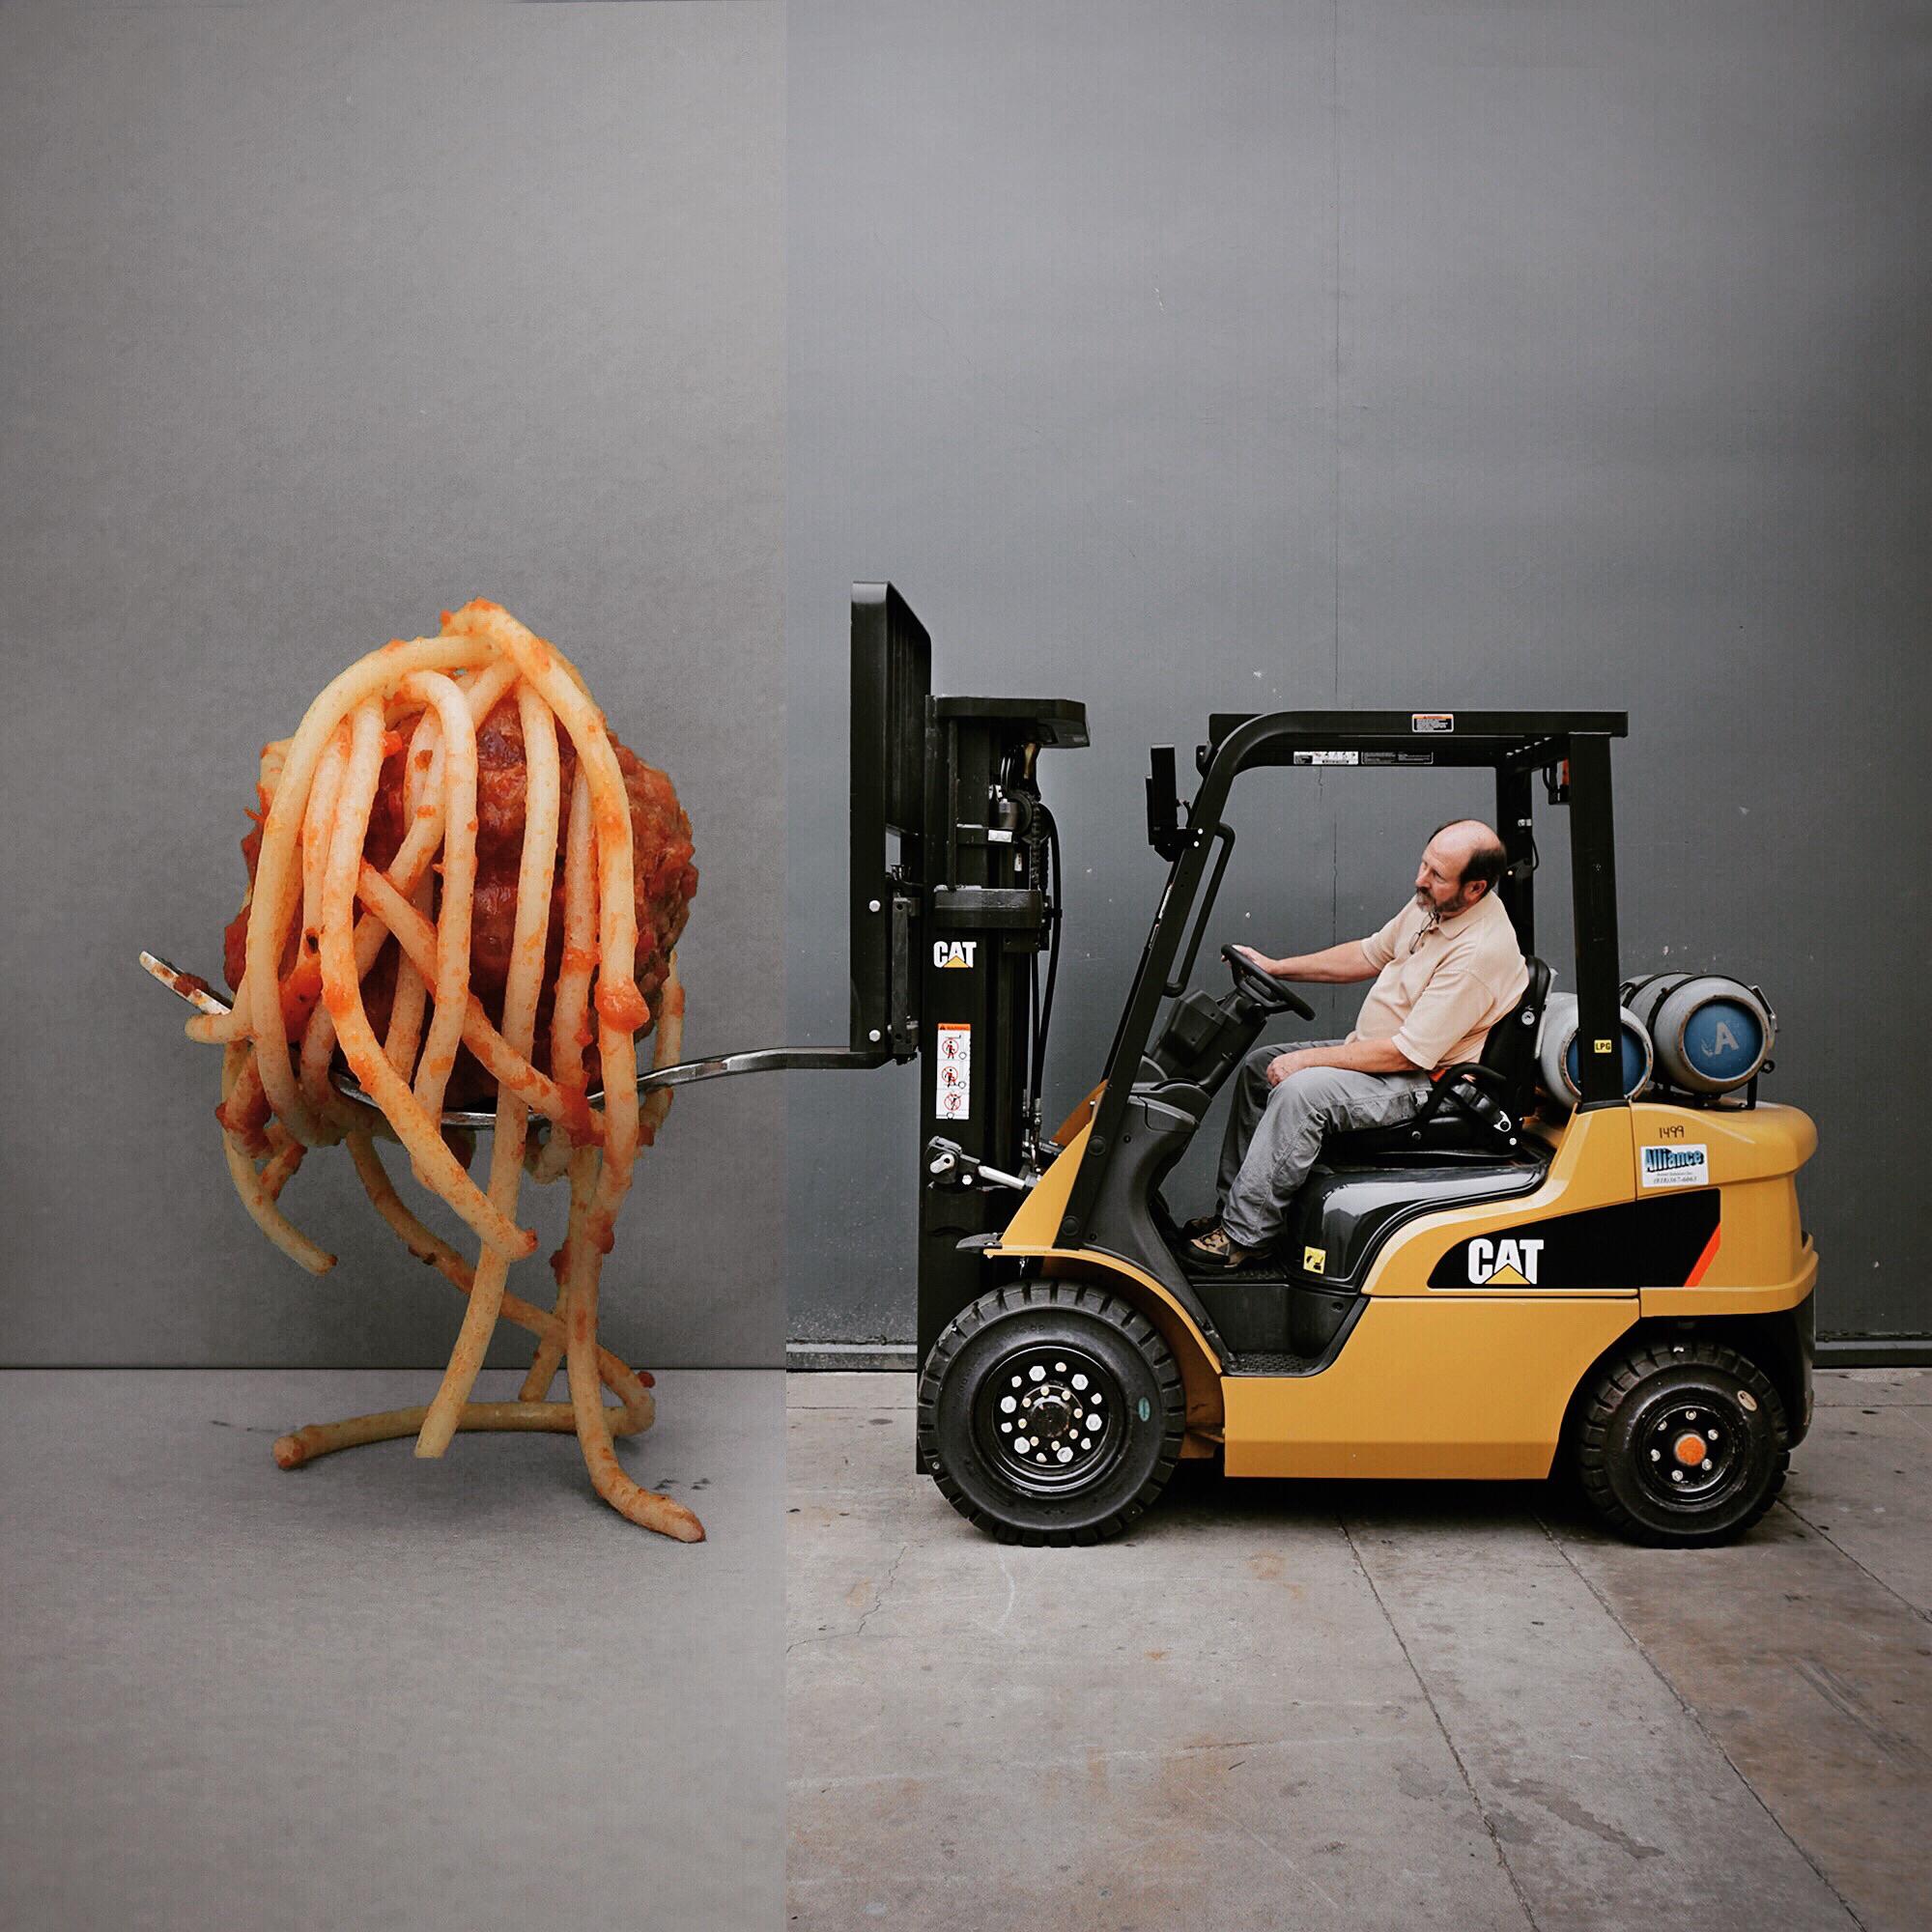 A spaghetti meatball being carried by a forklift